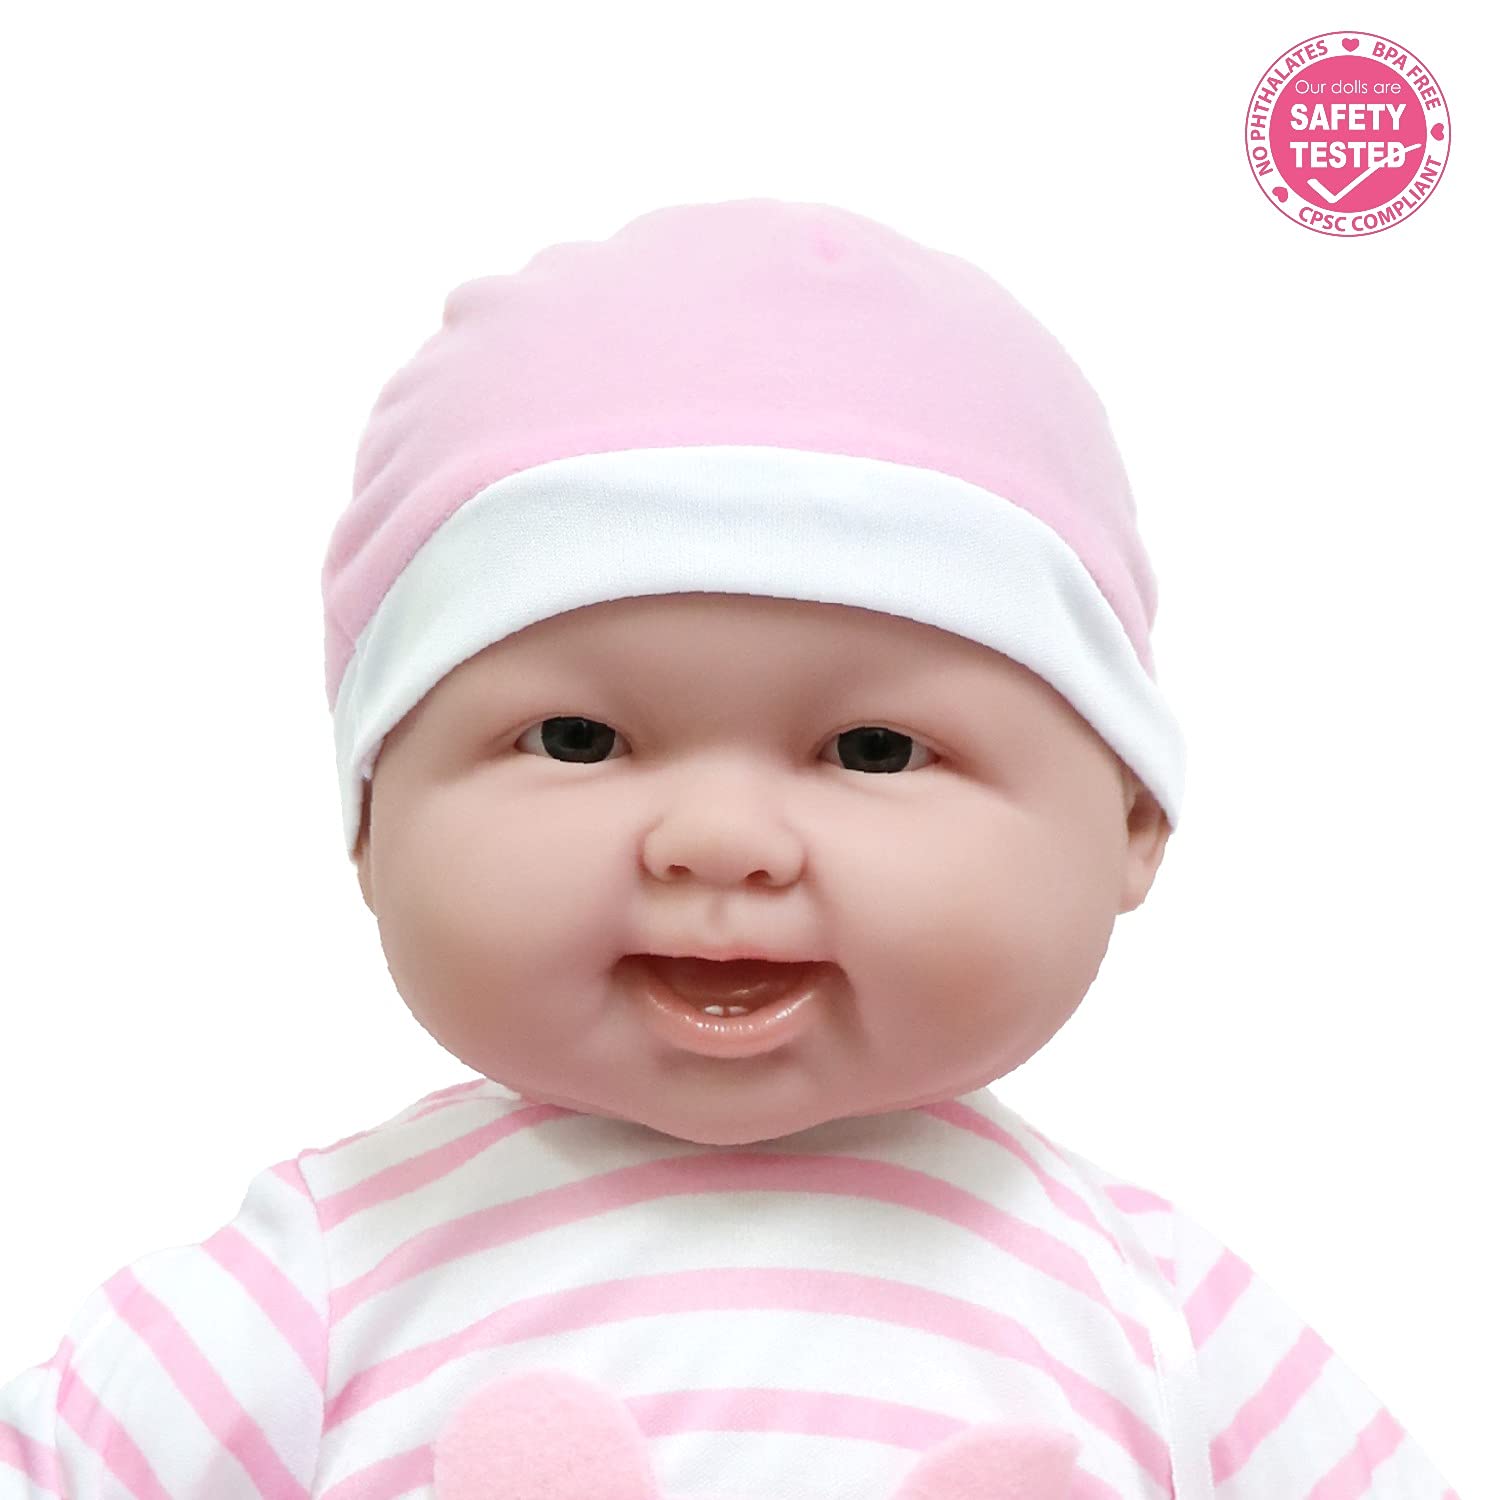 JC Toys ‘Lots to Cuddle Babies’ 20-Inch Pink Soft Body Baby Doll and Accessories Designed by Berenguer, Pink - caucasian